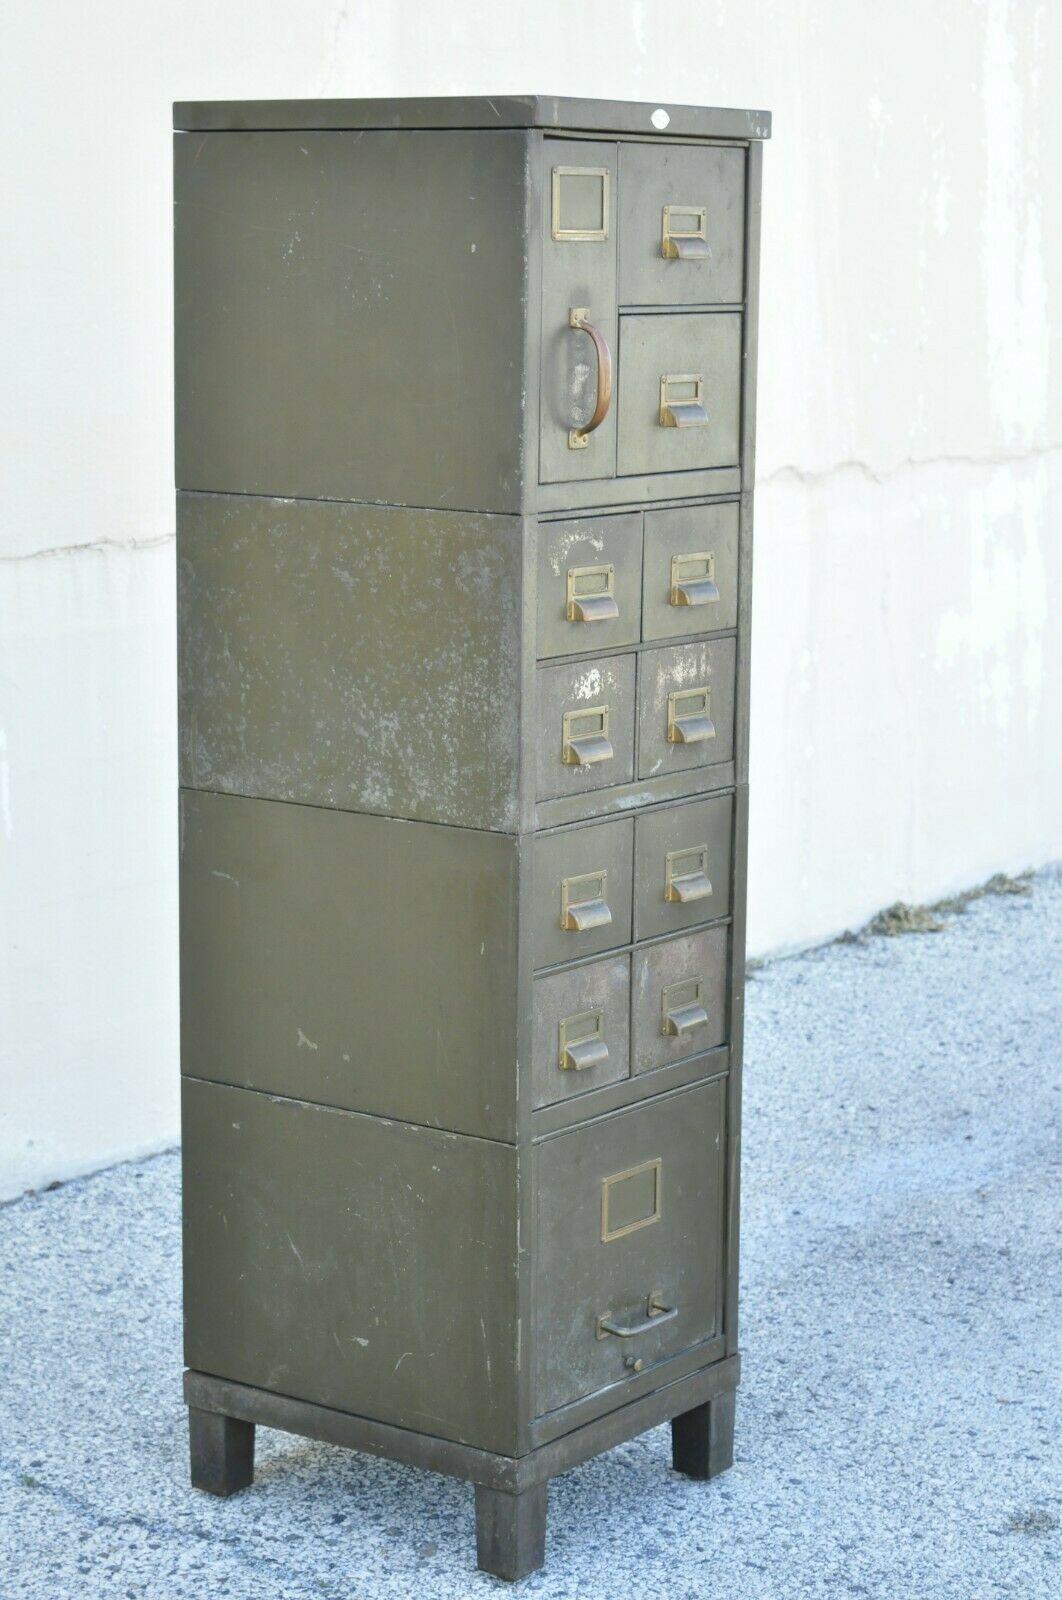 Vintage army green steel metal industrial narrow stacking file cabinet by Art Metal. Item features steel metal construction, 4 stacking file sections, original army green distressed finished, original label, 12 drawers, solid brass hardware, very